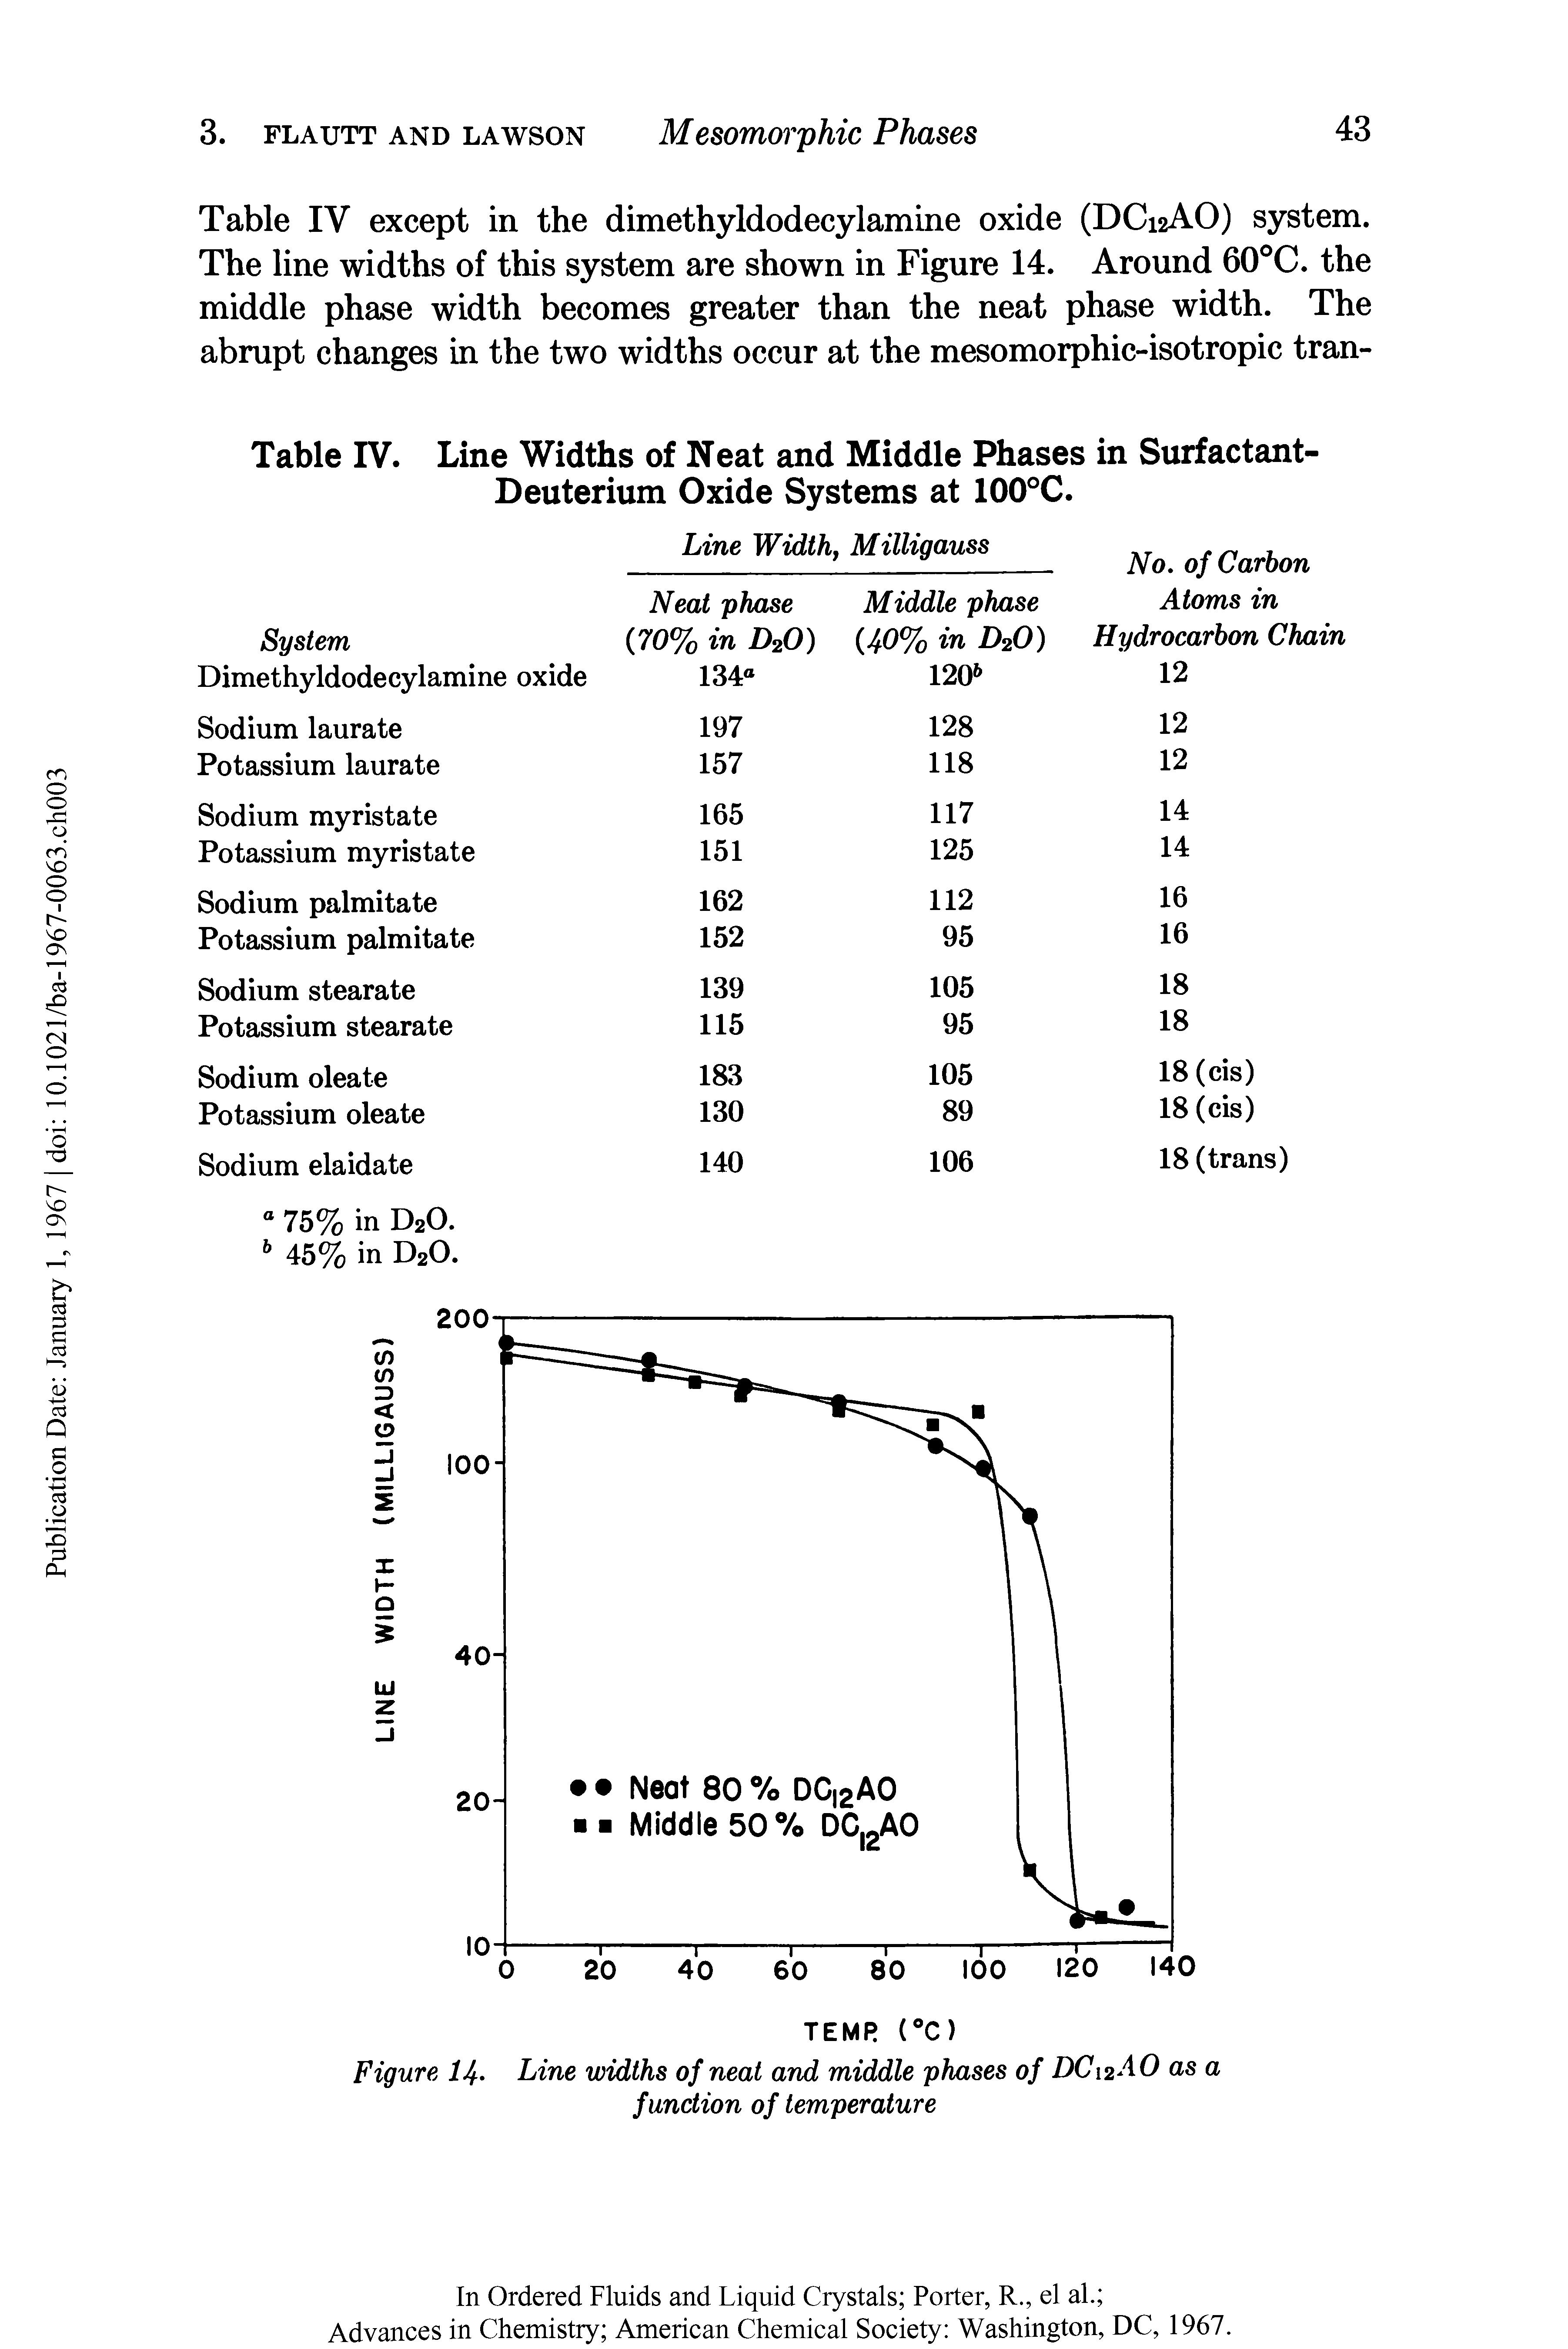 Table IV except in the dimethyldodecylamine oxide (DC12AO) system. The line widths of this system are shown in Figure 14. Around 60°C. the middle phase width becomes greater than the neat phase width. The abrupt changes in the two widths occur at the mesomorphic-isotropic tran-...